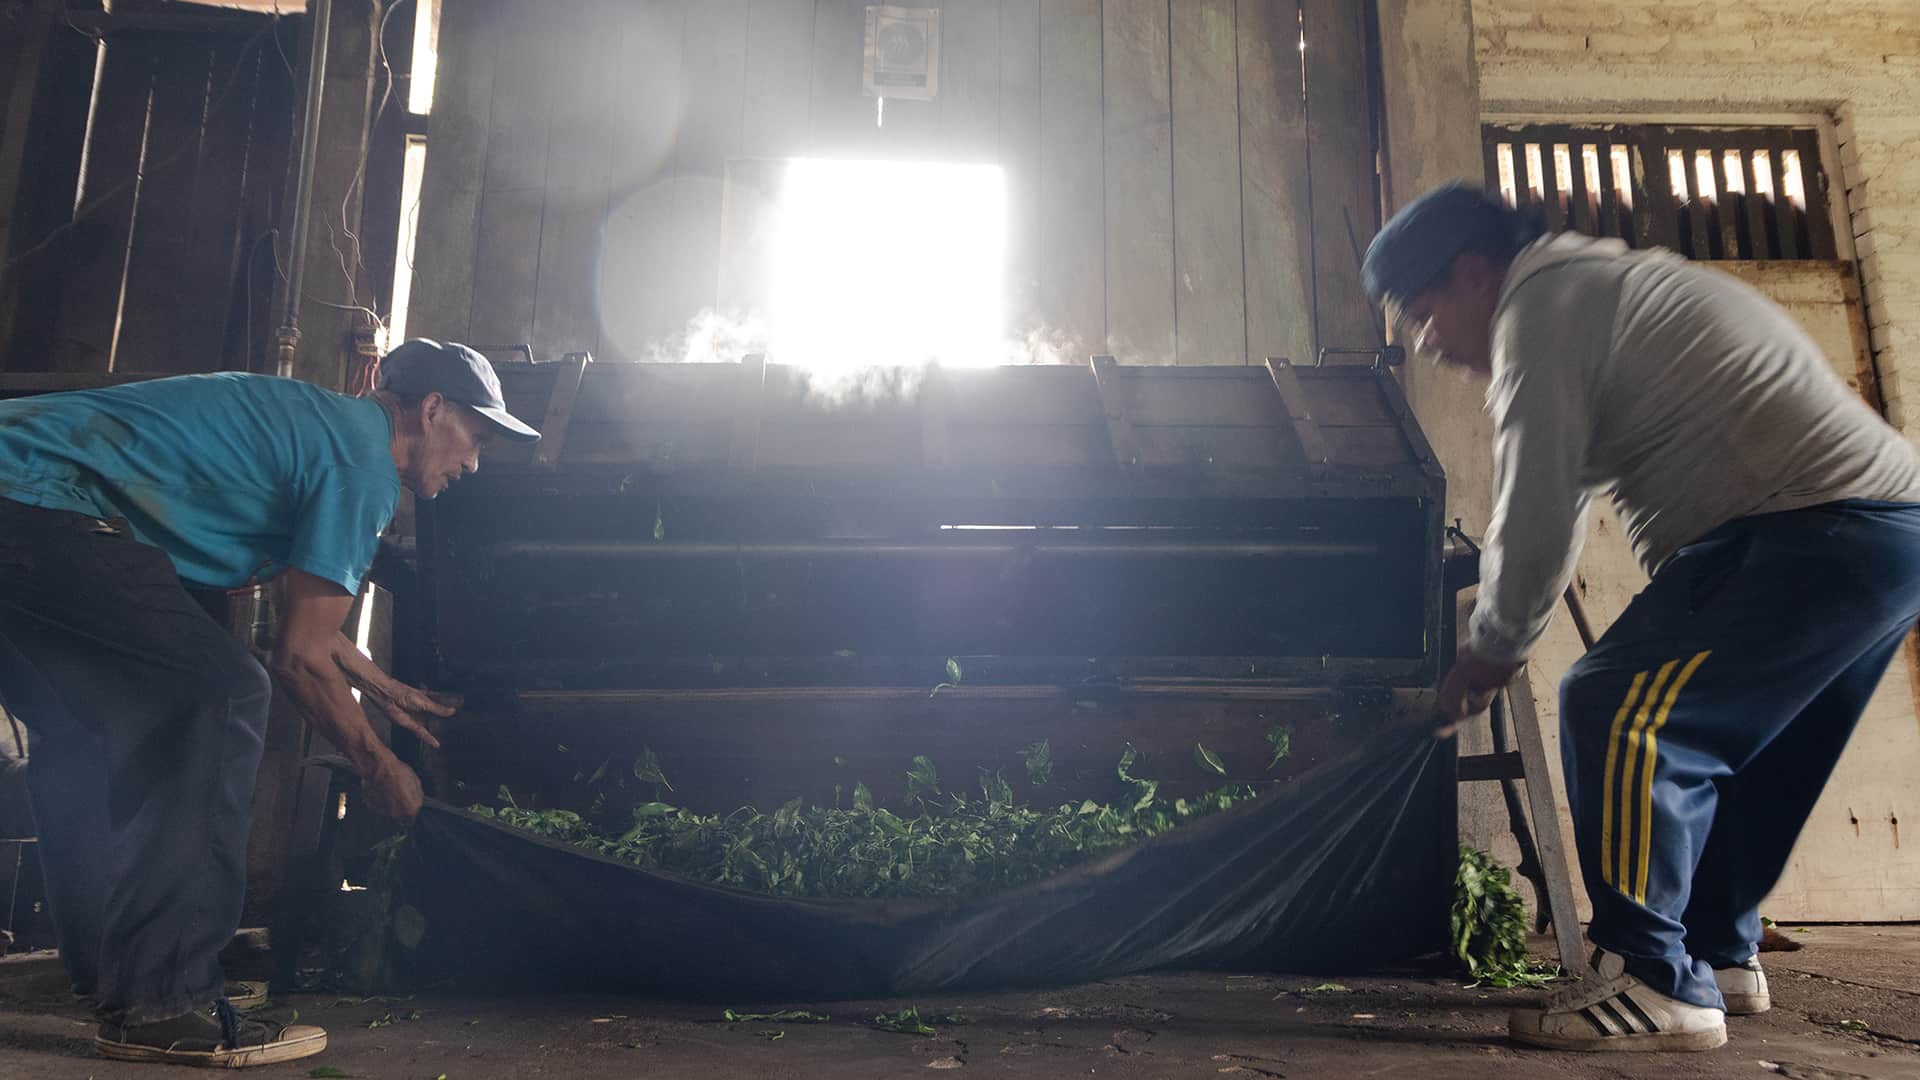 Two man processing tea in an early stage at an old factory - RESPONSible Travel Peru